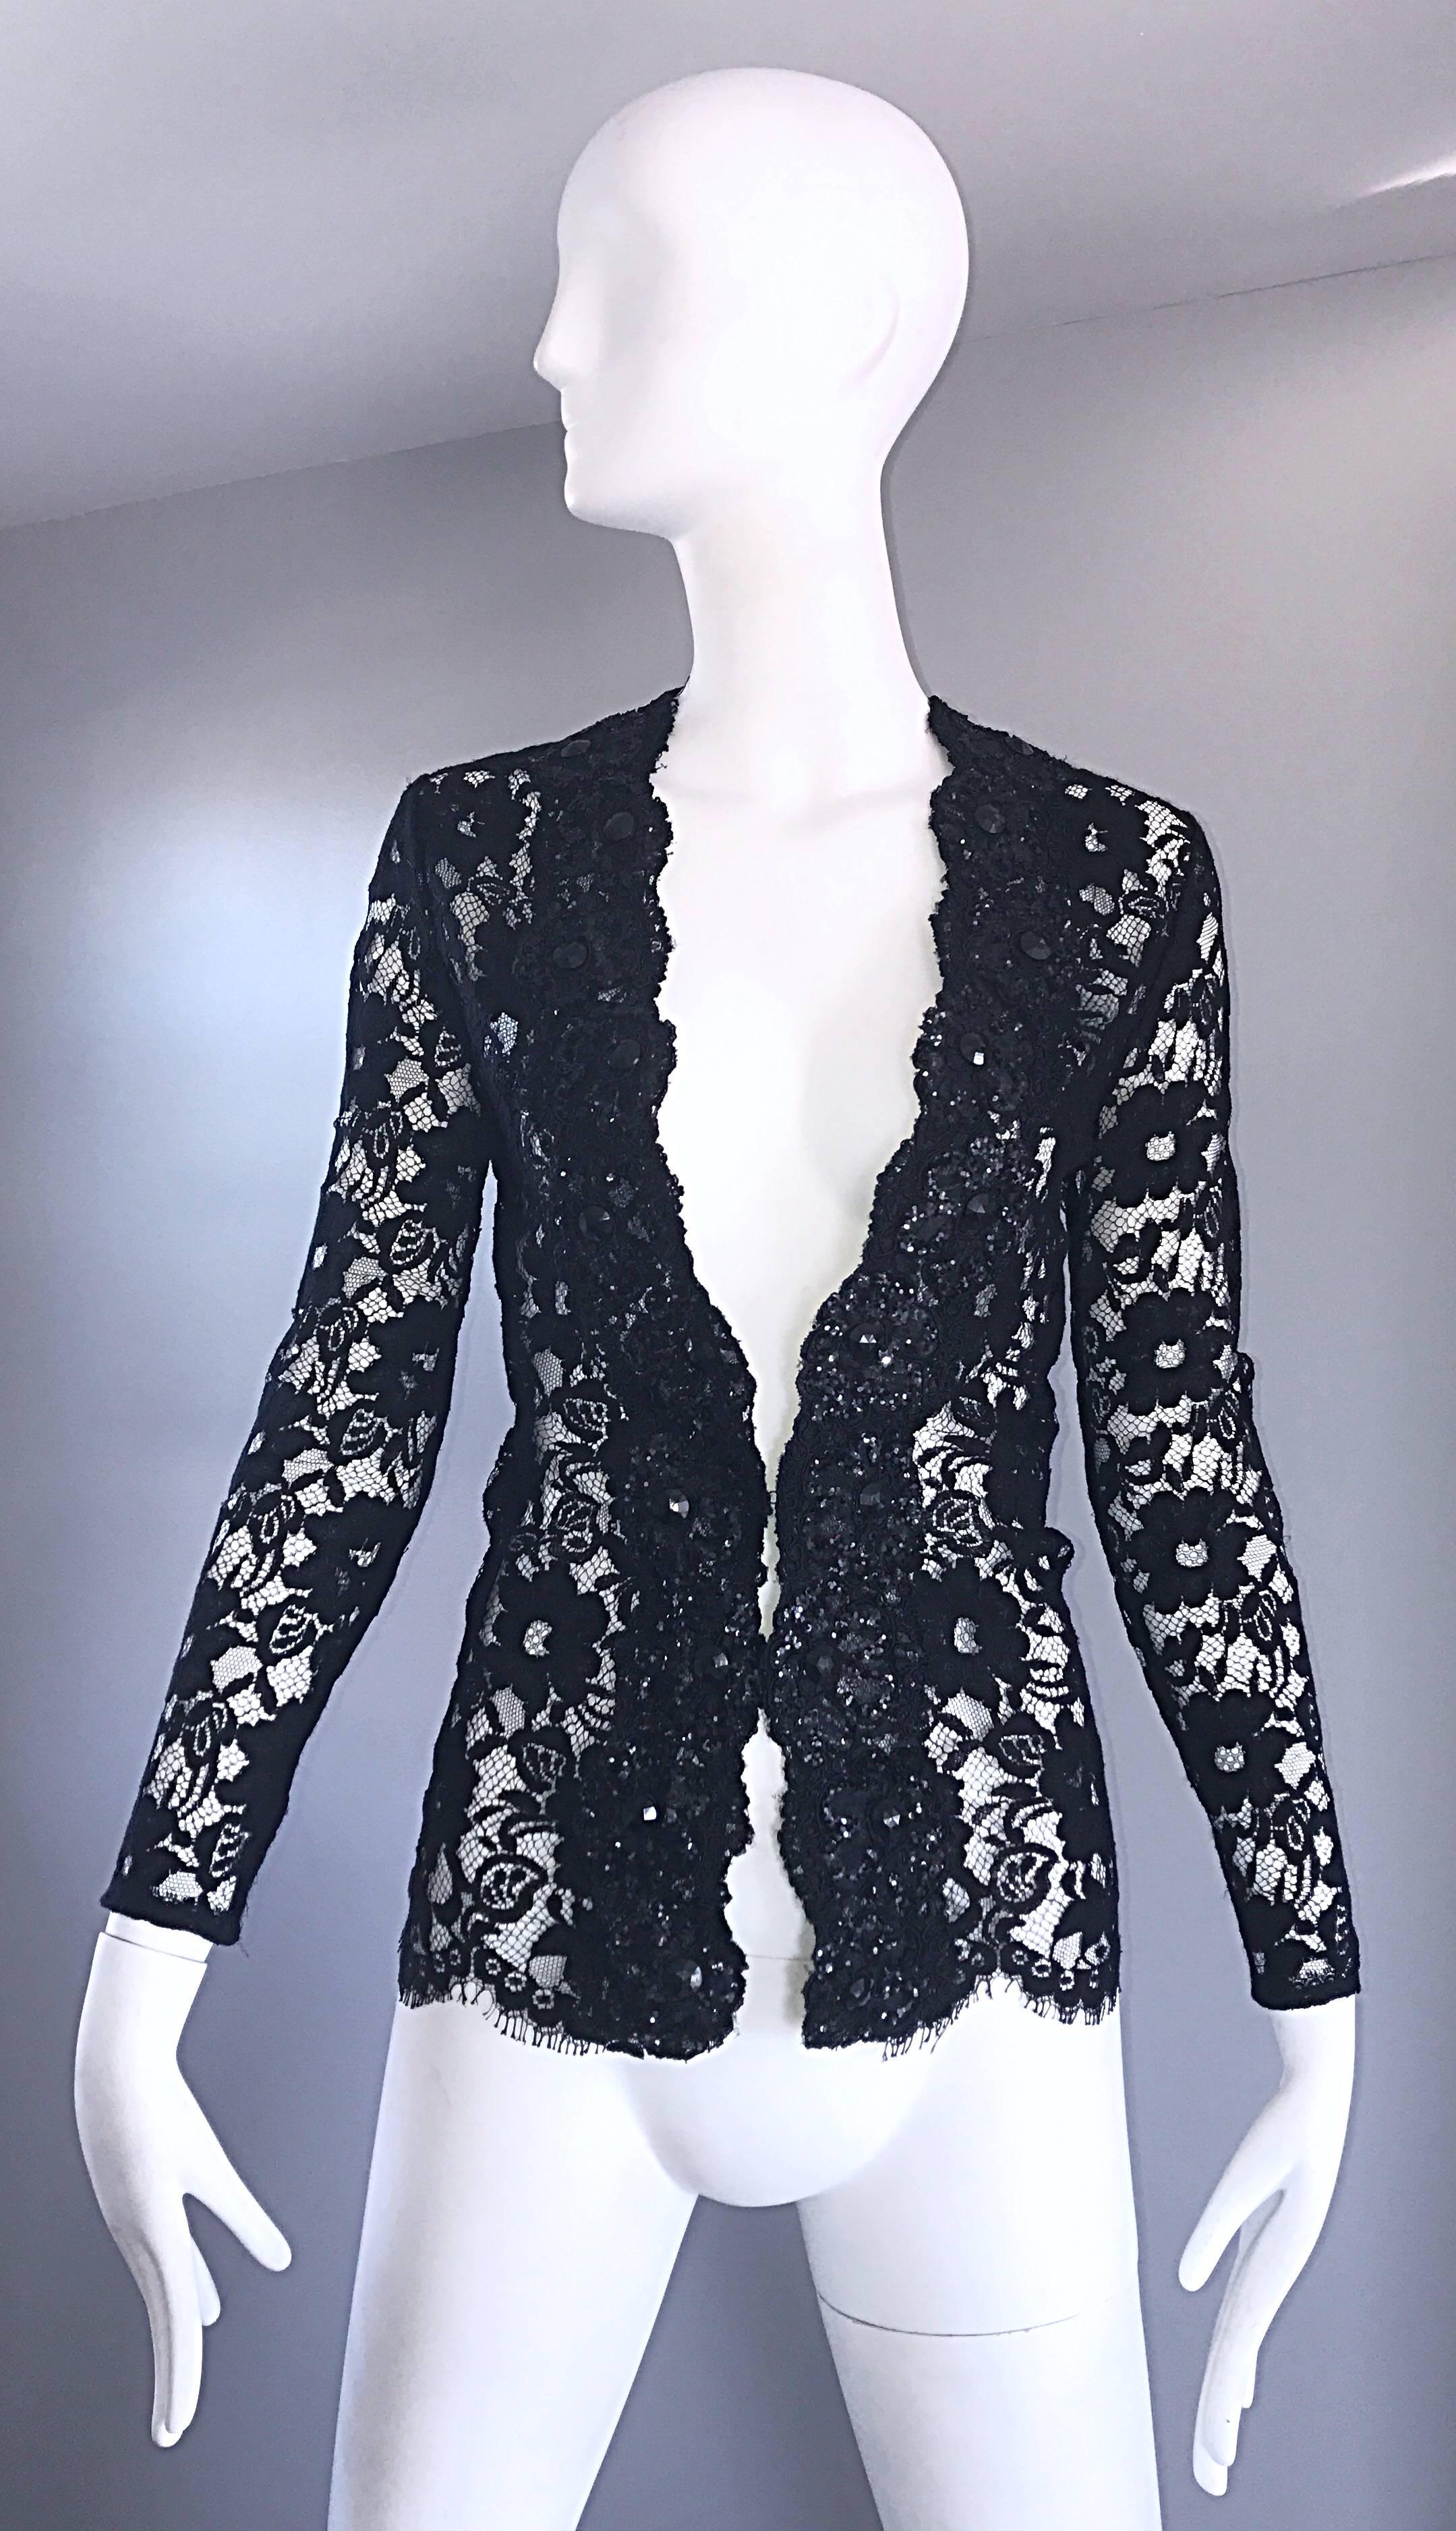 Beautiful vintage VICKY TIEL COUTURE black chantilly lace beaded and sequined top or jacket! Features hundreds of hand-sewn sequins and beads throughout the front bodice. Single hook-and-eye closure. Can easily be dressed up or down. Great with